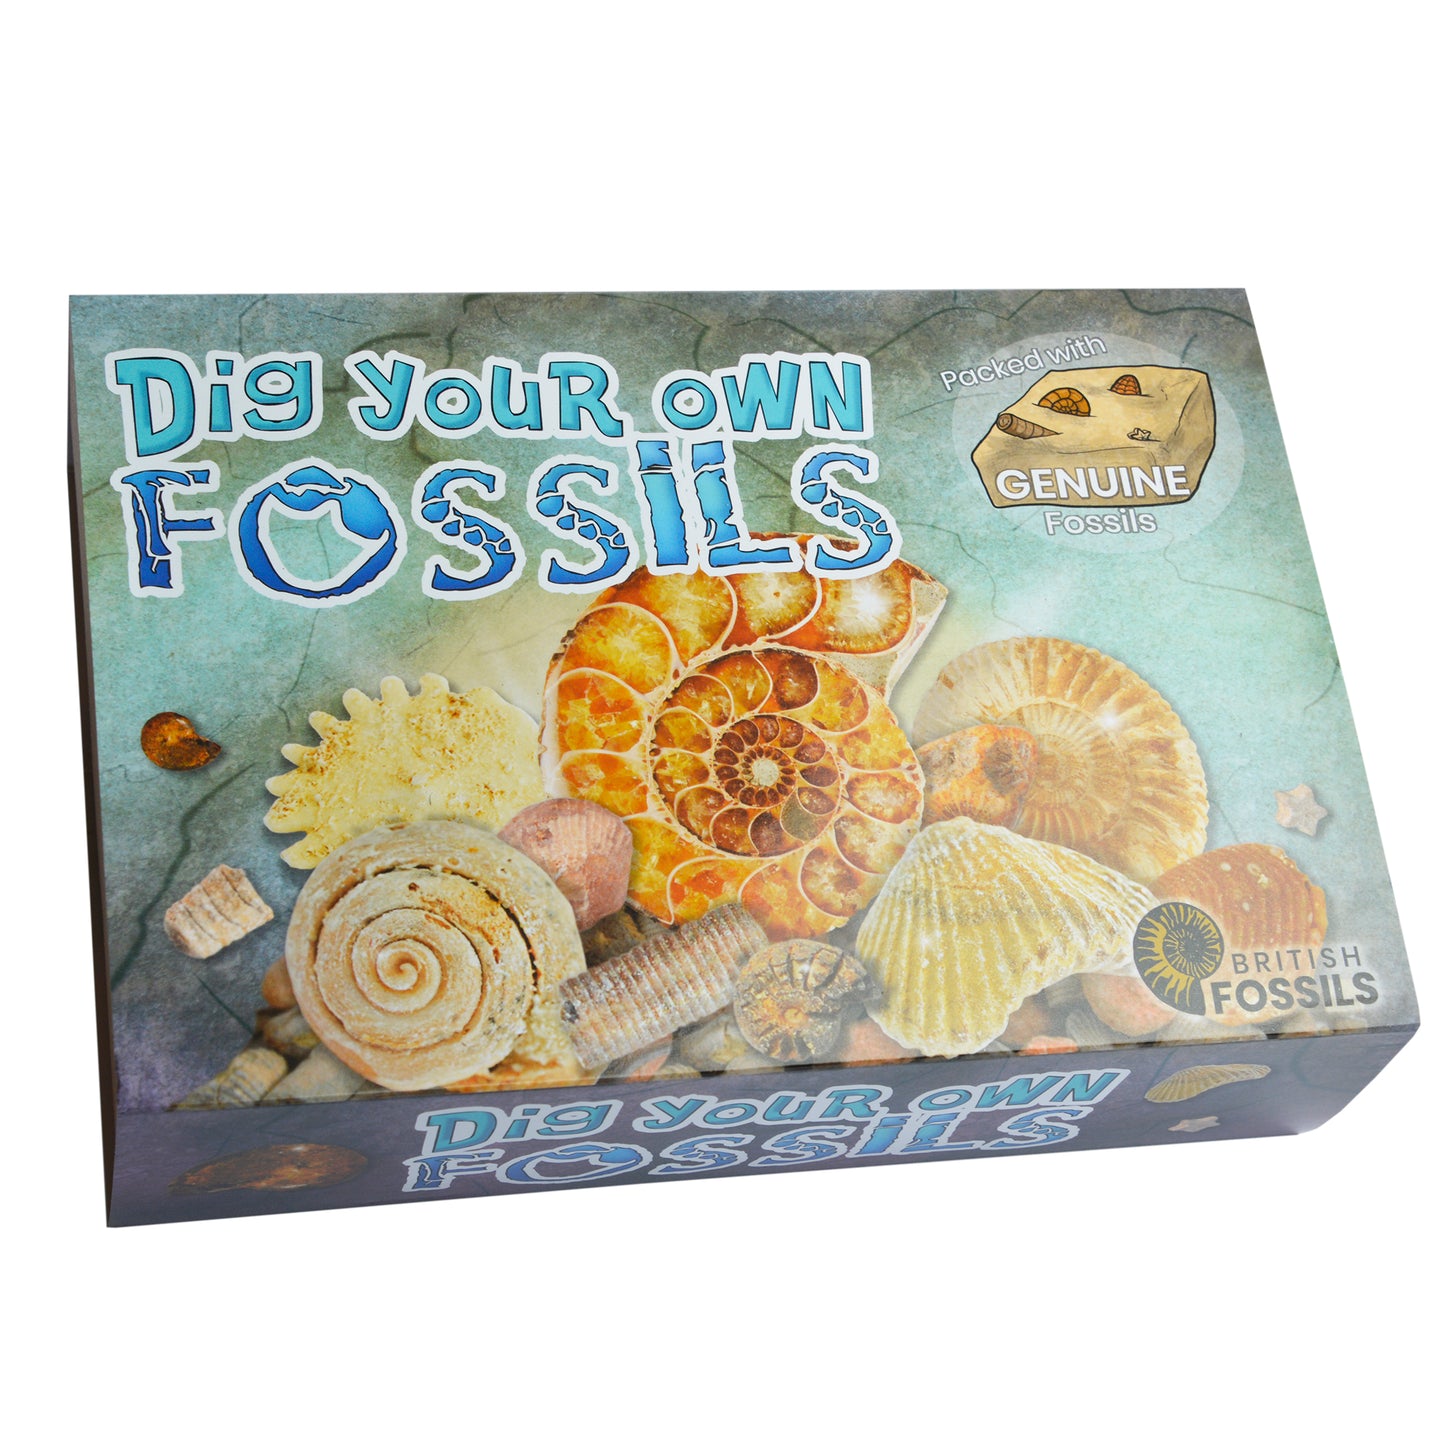 Dig your own Fossils